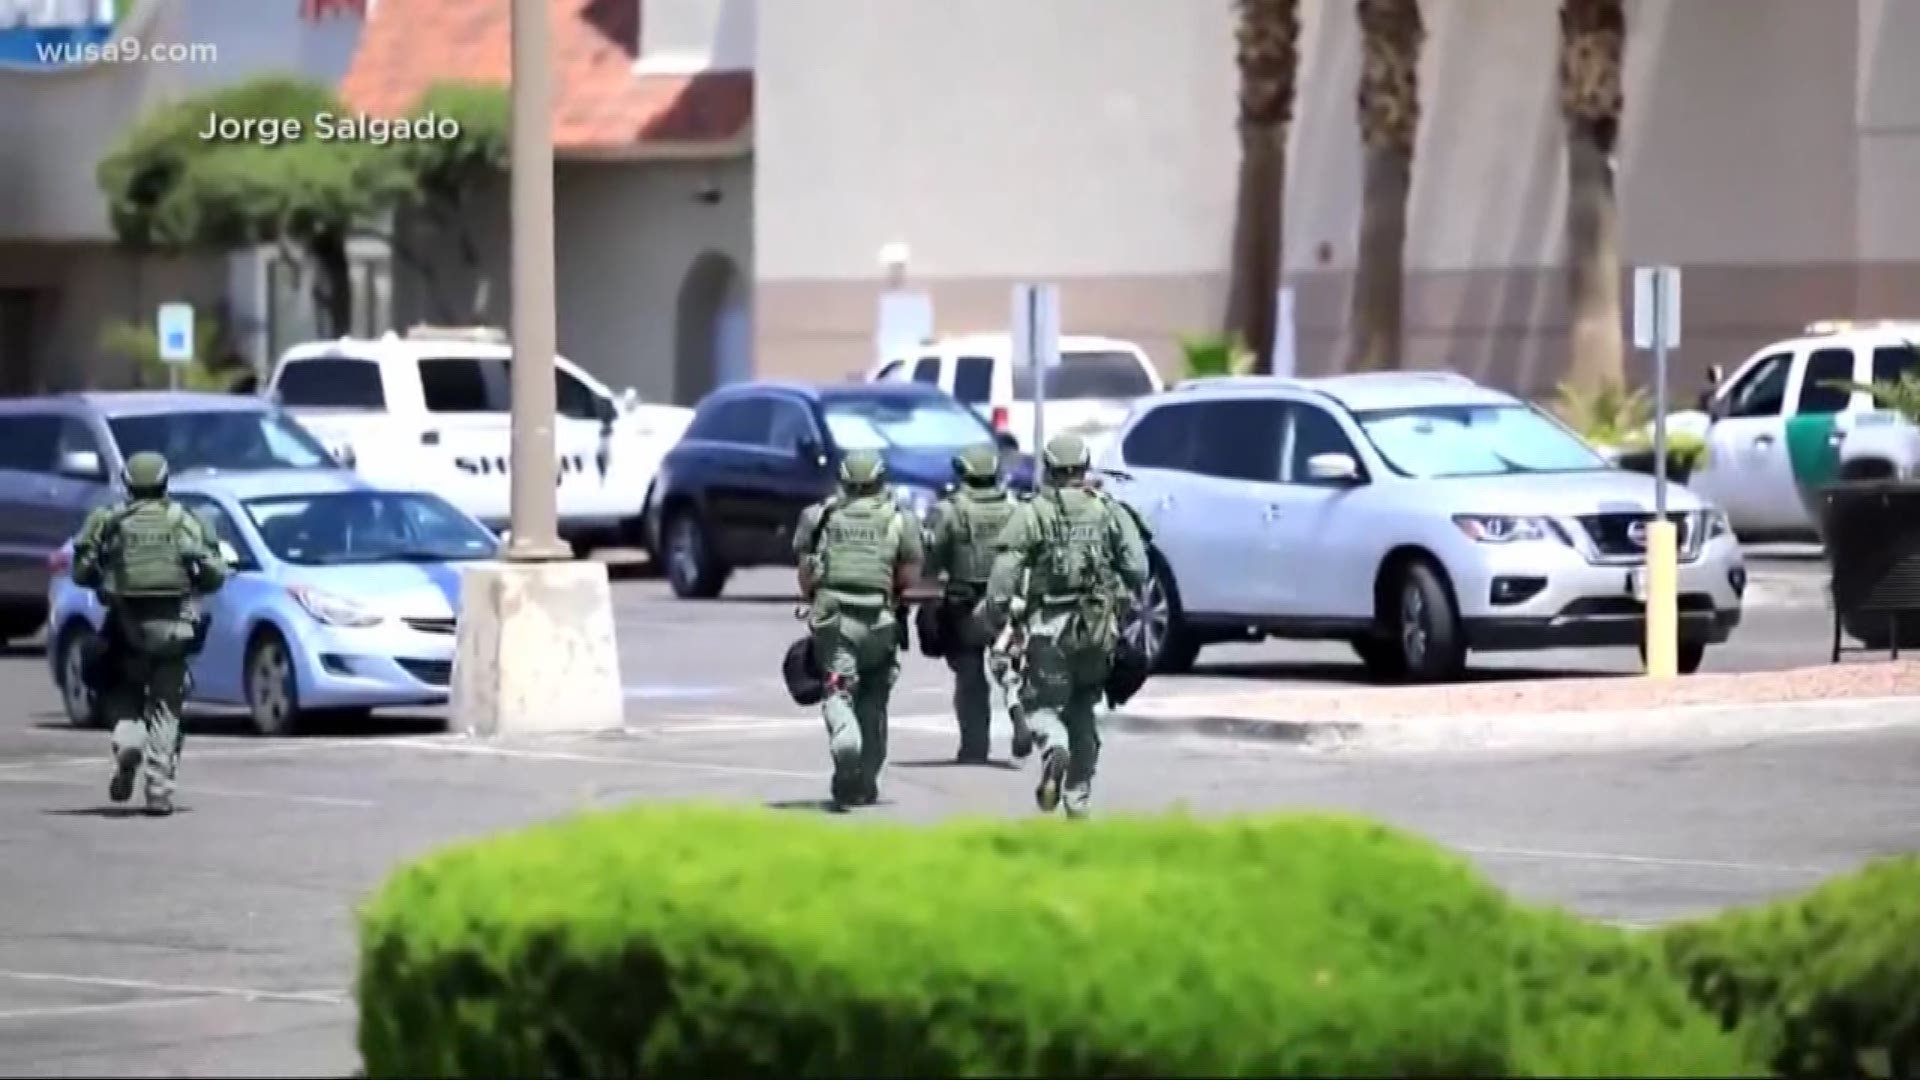 There are multiple victims after a deadly mass shooting Saturday morning at a Walmart in El Paso, Texas, and one person is in custody, police said. 

At least 18 people are dead, according to news reports. A law enforcement official says the suspect who was taken into custody after a deadly shooting at an El Paso shopping complex is 21-year-old Patrick Crusius.